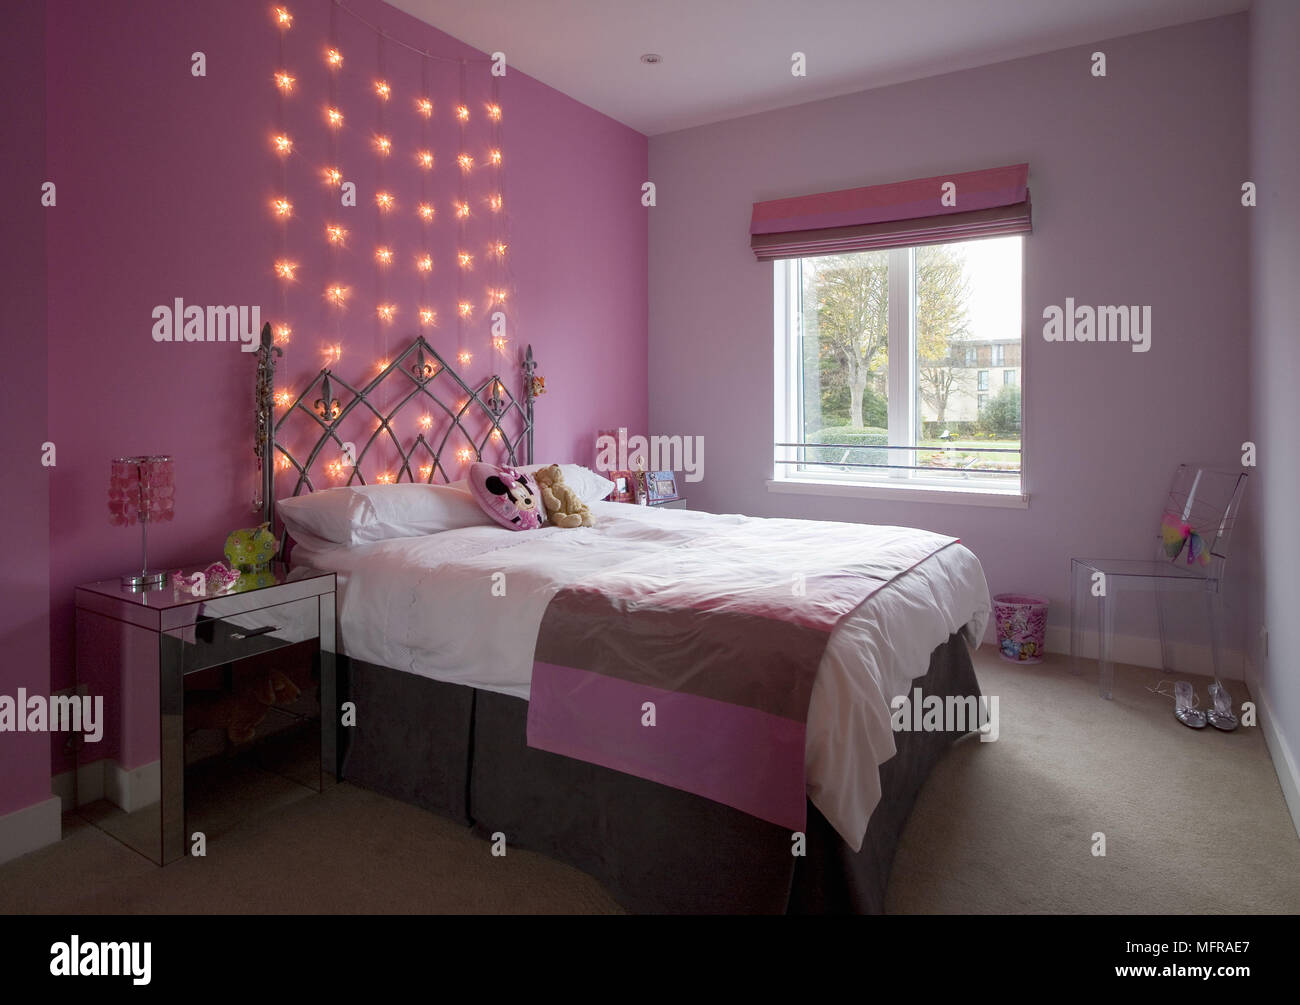 Wrought iron double bed in pink bedroom with fairy lights on wall Stock Photo